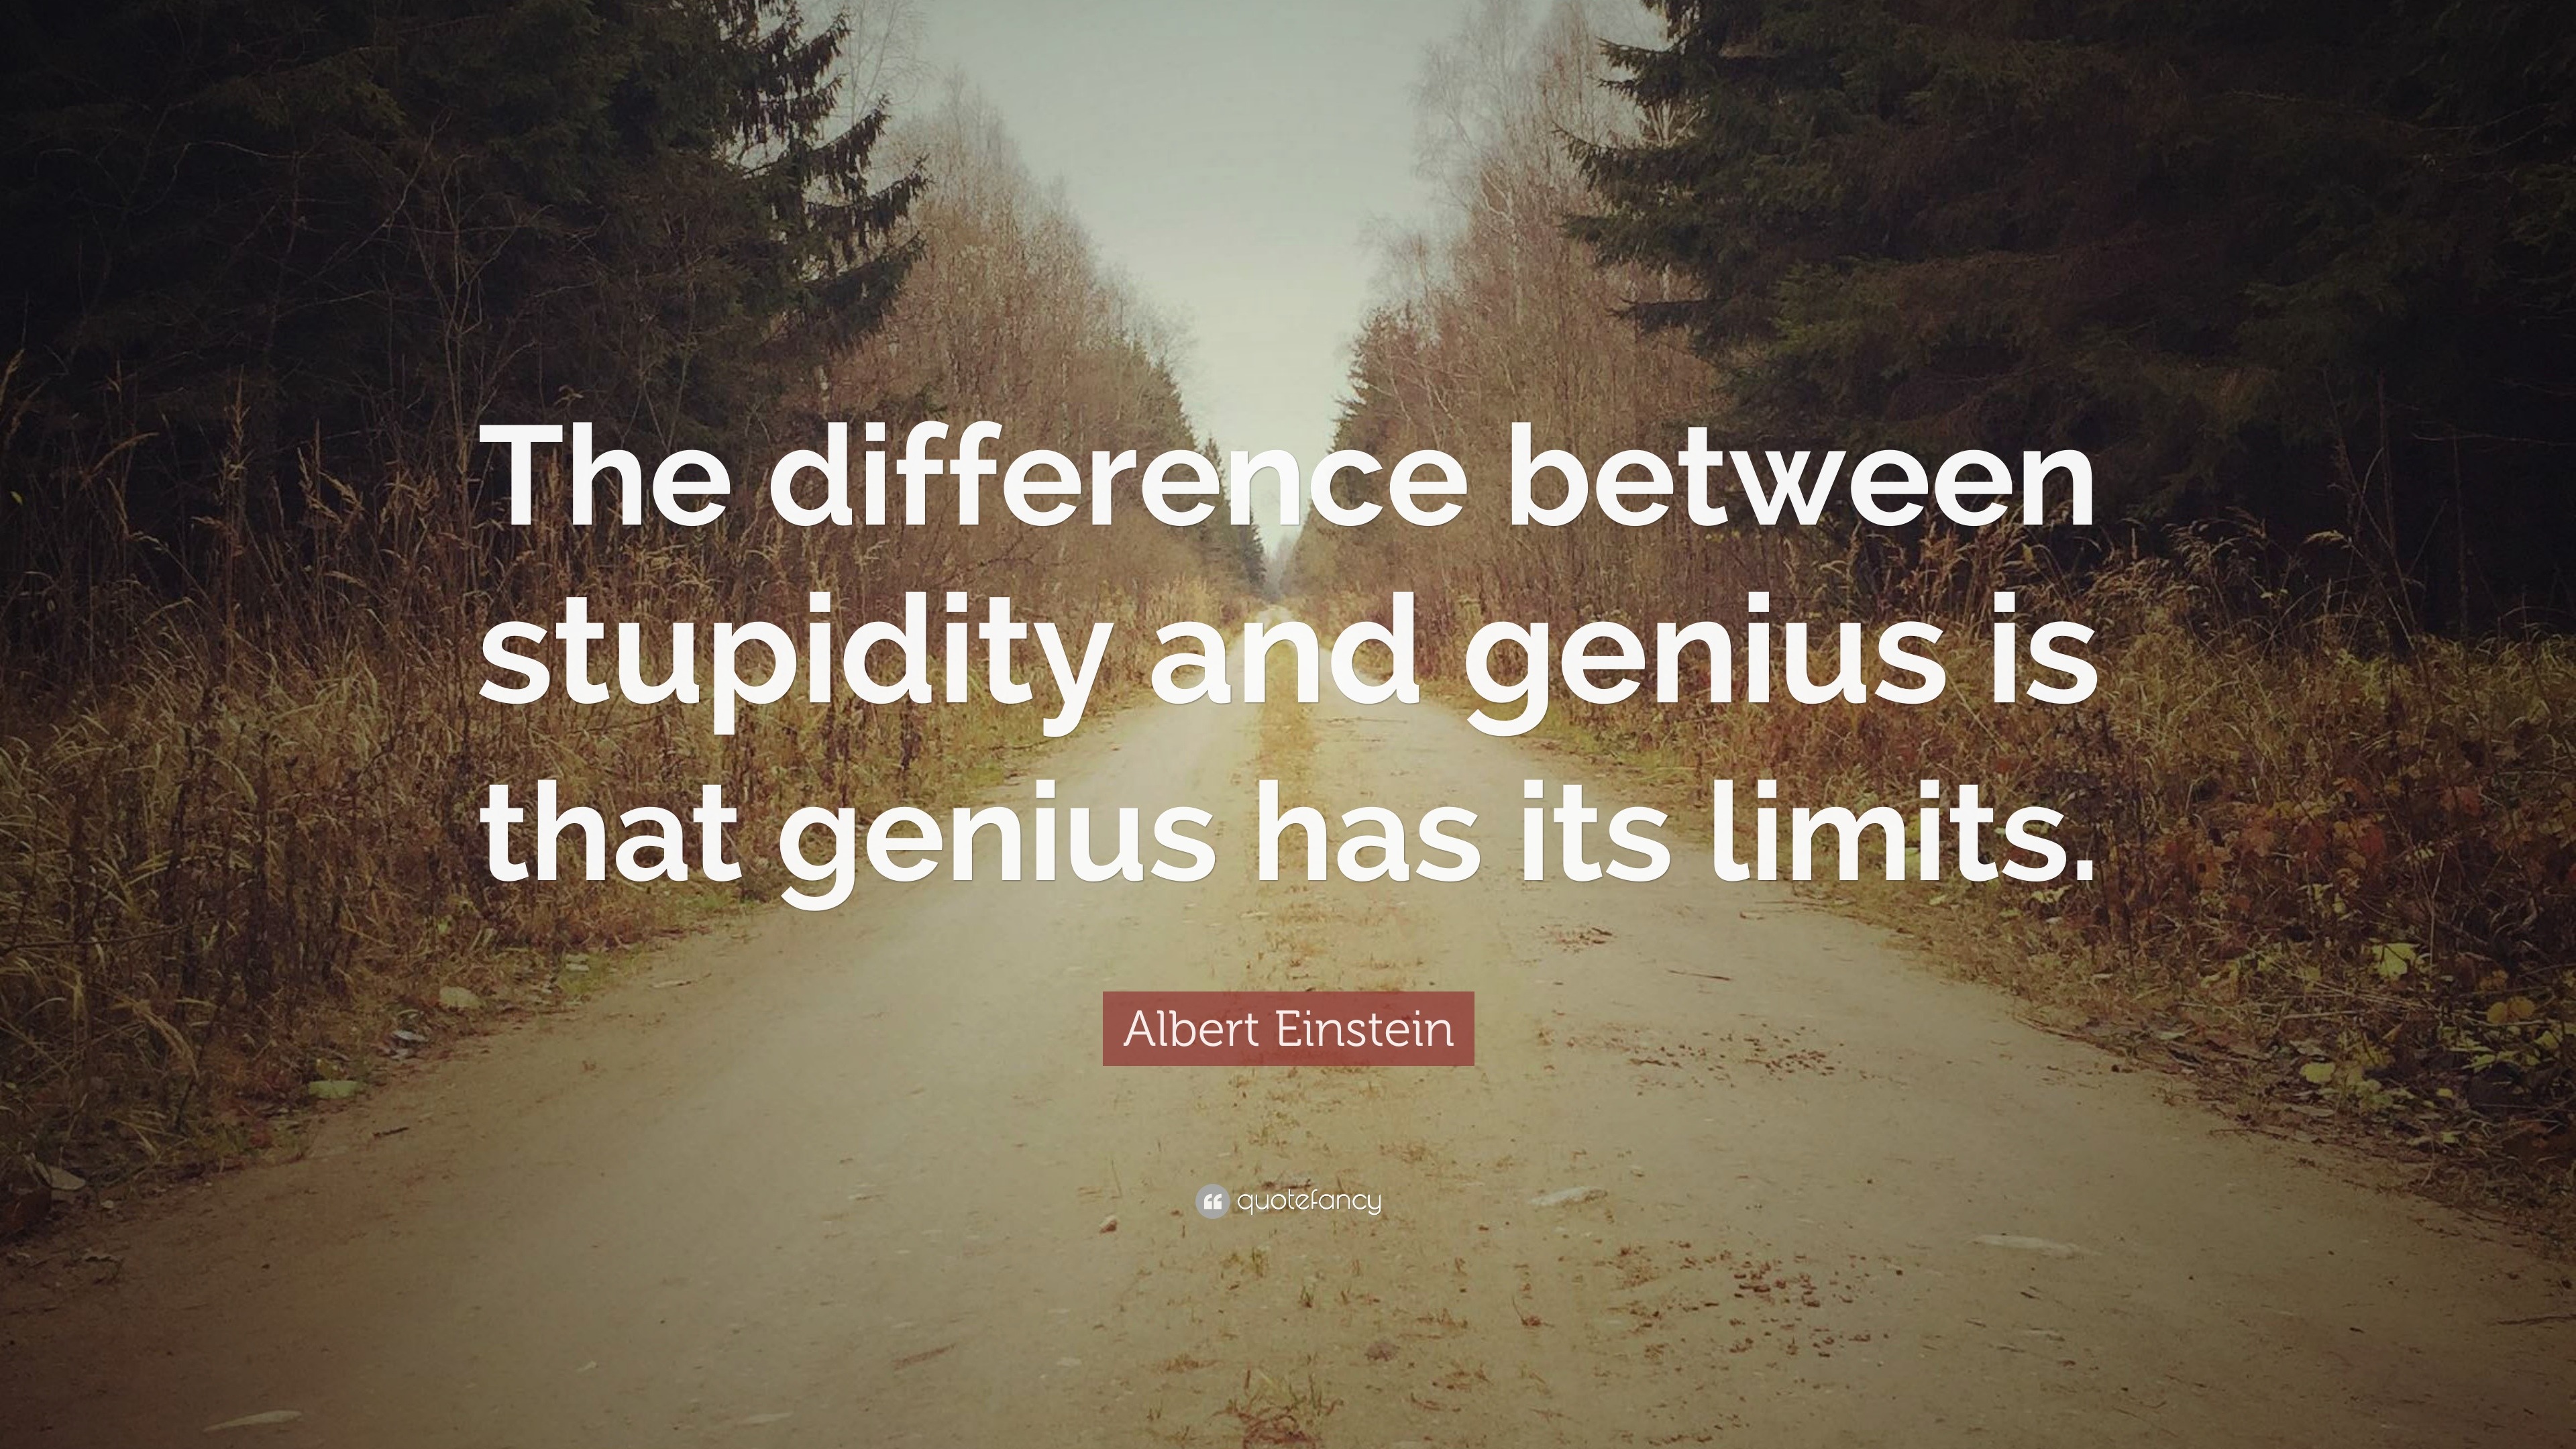 Albert Einstein Quote: "The difference between stupidity and genius is that genius has its ...